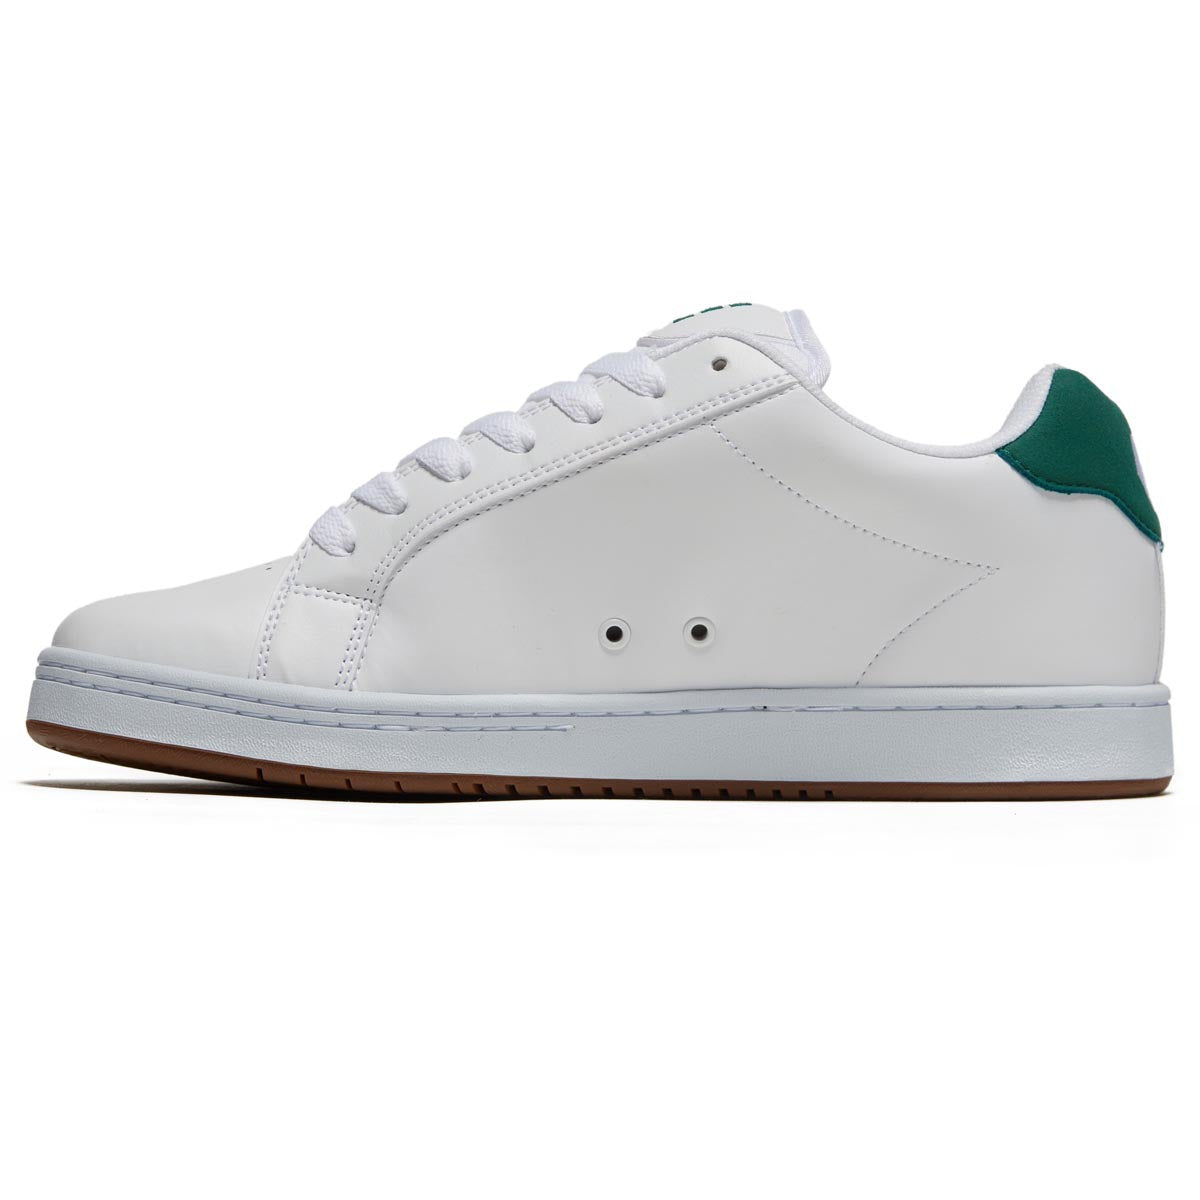 Etnies Fader Shoes - White/Green image 2